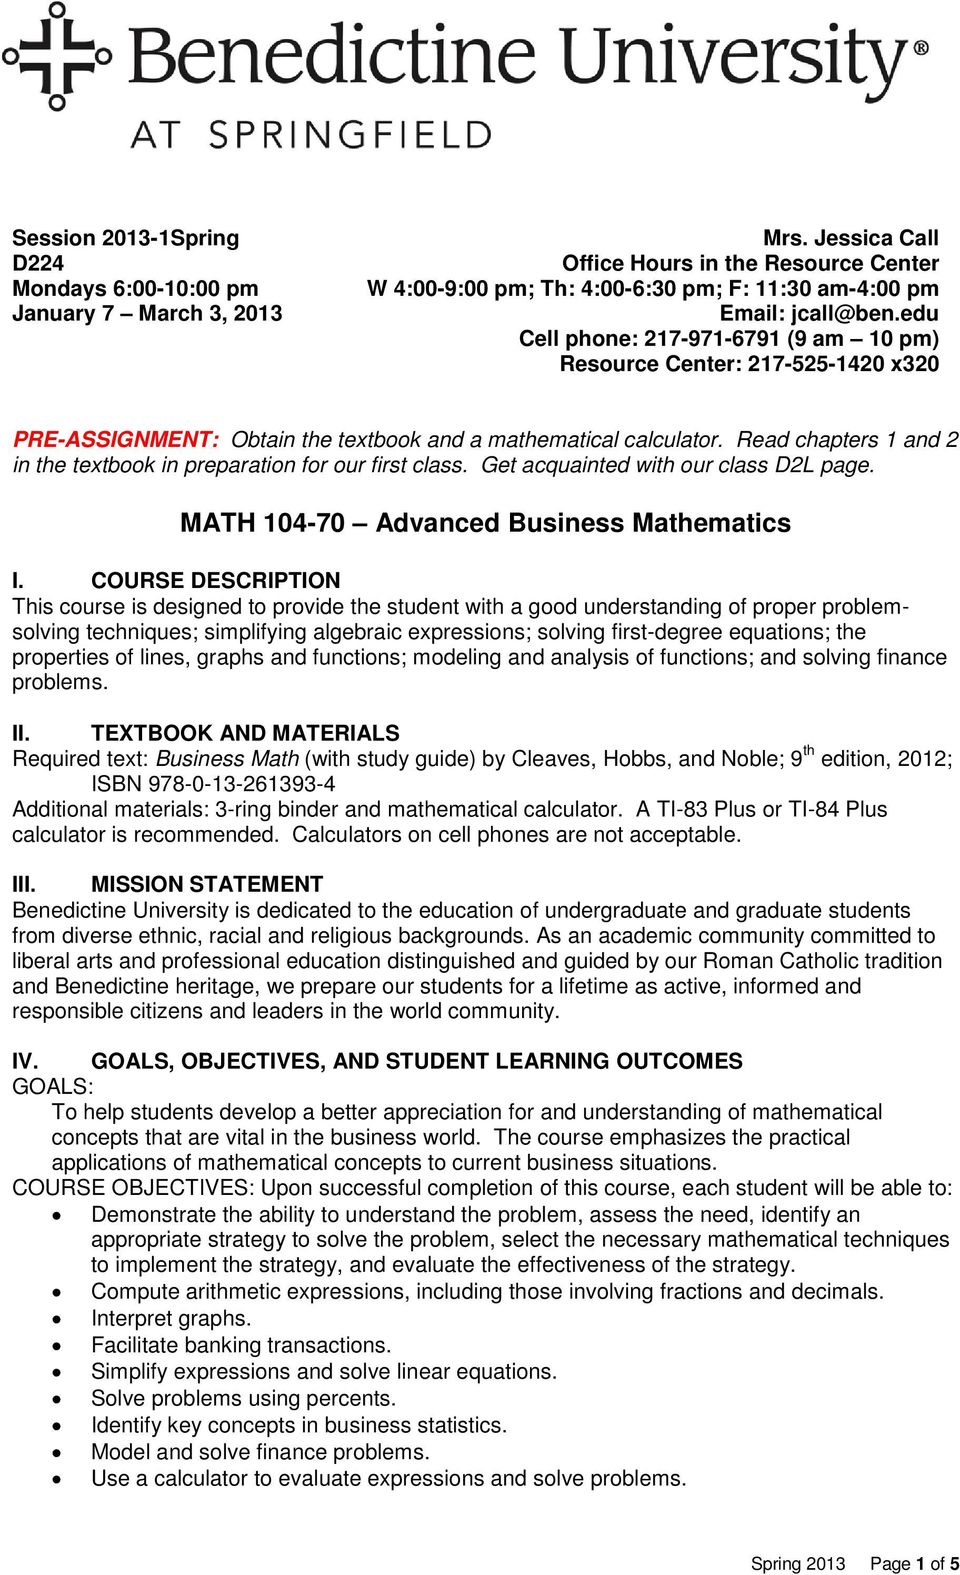 Read chapters 1 and 2 in the textbook in preparation for our first class. Get acquainted with our class D2L page. MATH 104-70 Advanced Business Mathematics I.